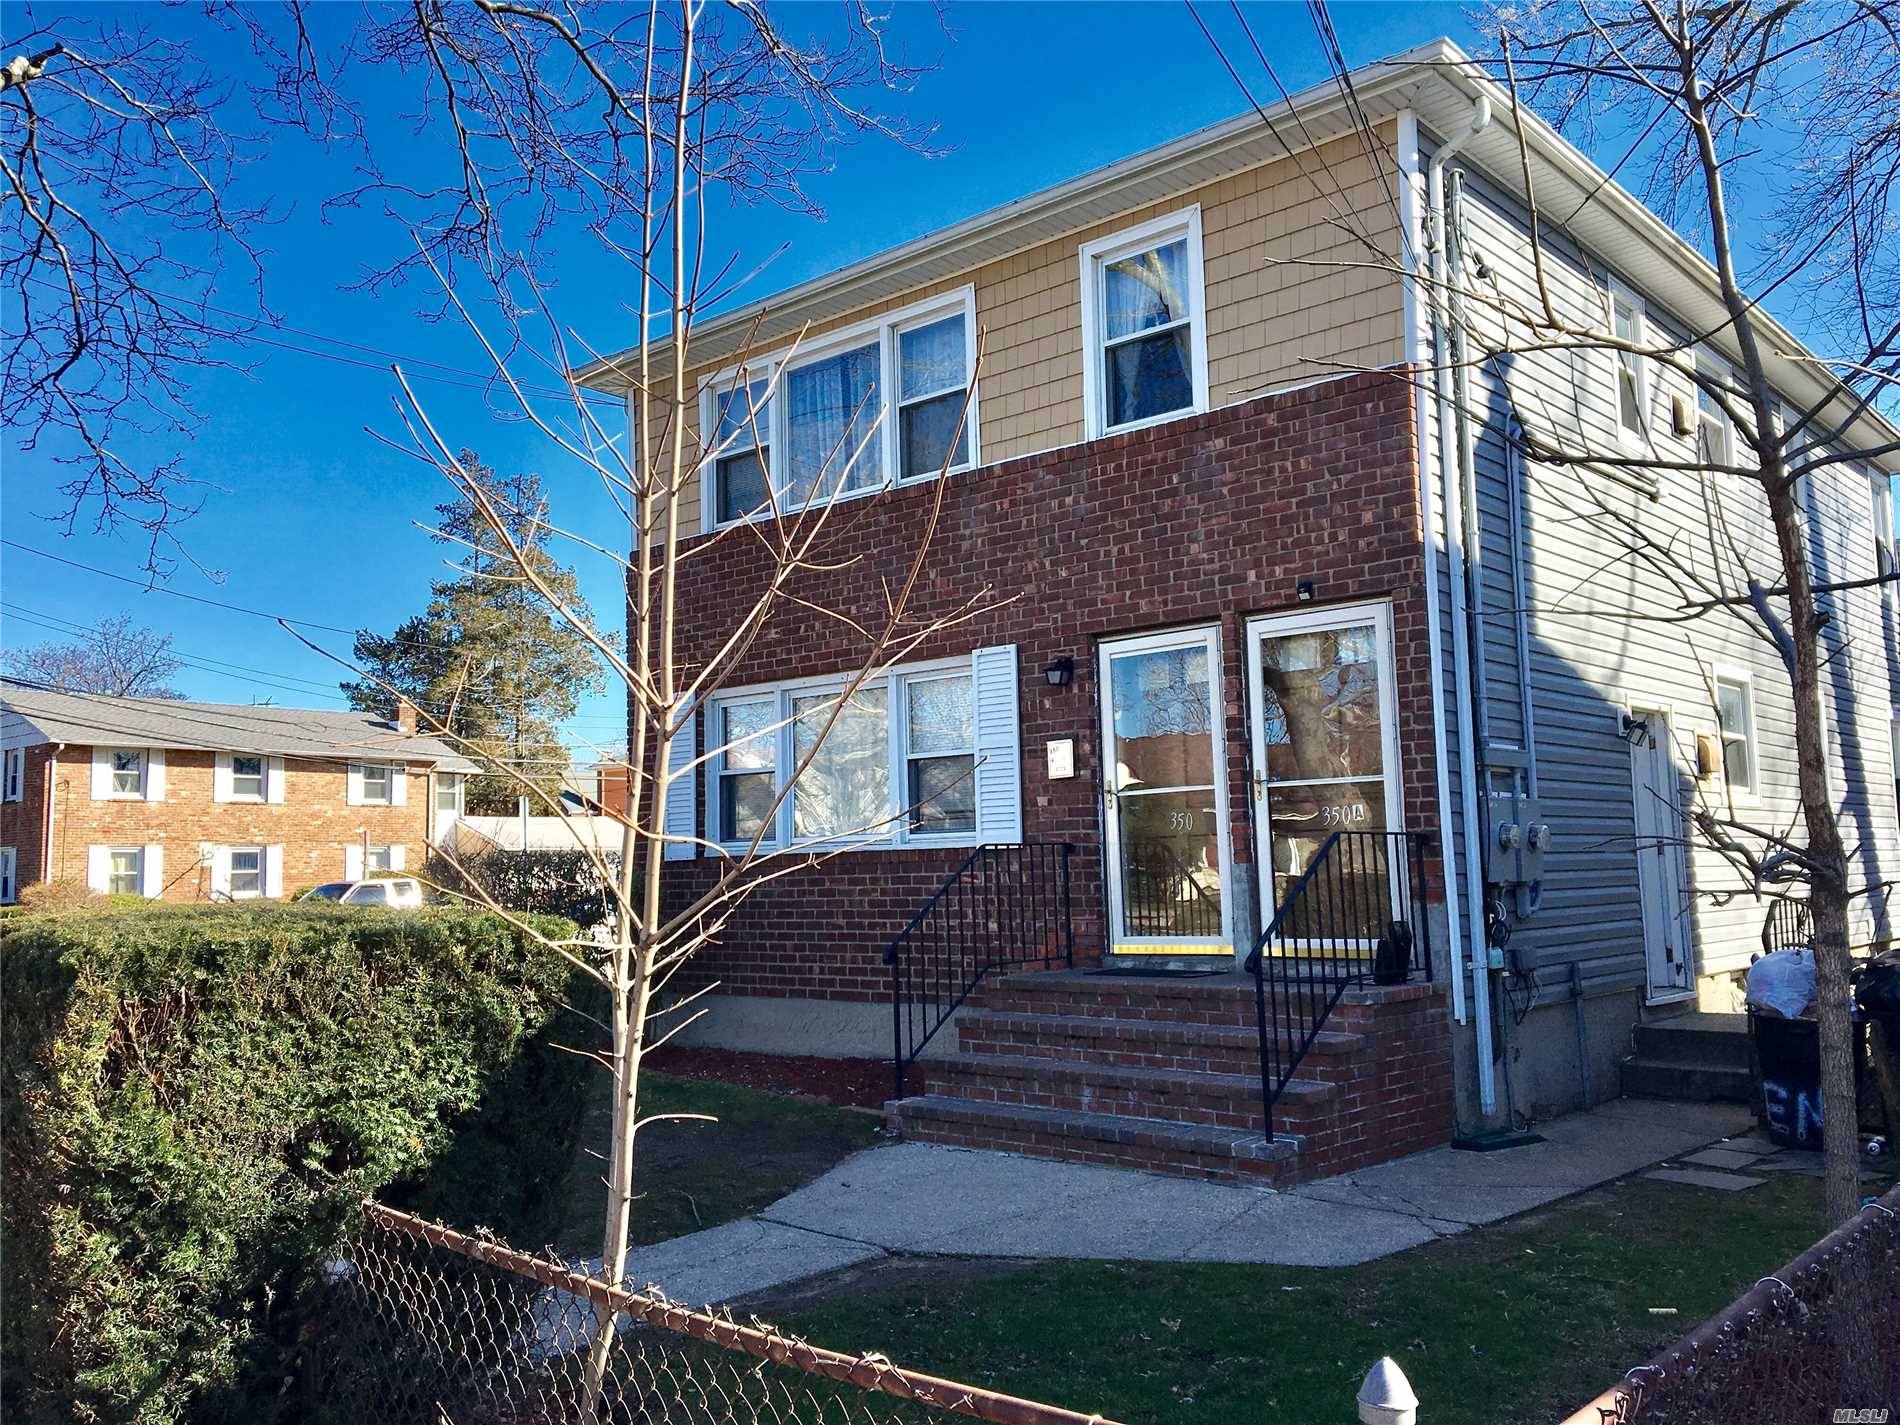 Great Investment Opportunity - Two 3 Br Rental Units Plus A Full Finished Basement - $62,400 Annual Income - Completely Renovated In 2014.